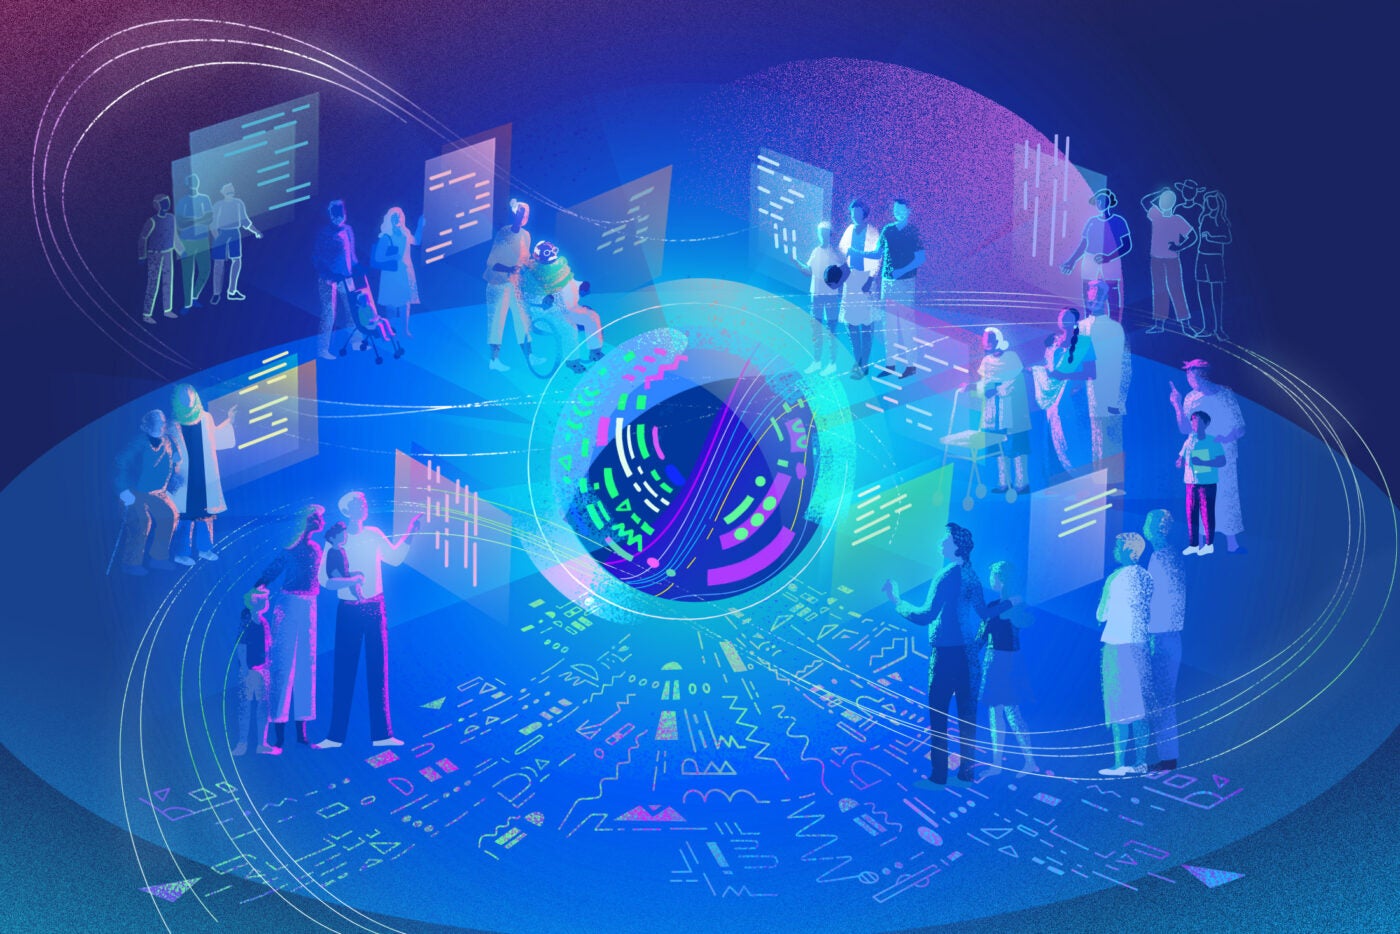 Illustration: An orb with shapes and symbols indicating artificial intelligence swirls with lines and information. Figures and families interact with screens of translated AI into words and data. The illustration is shades of blue, purples, and grey.